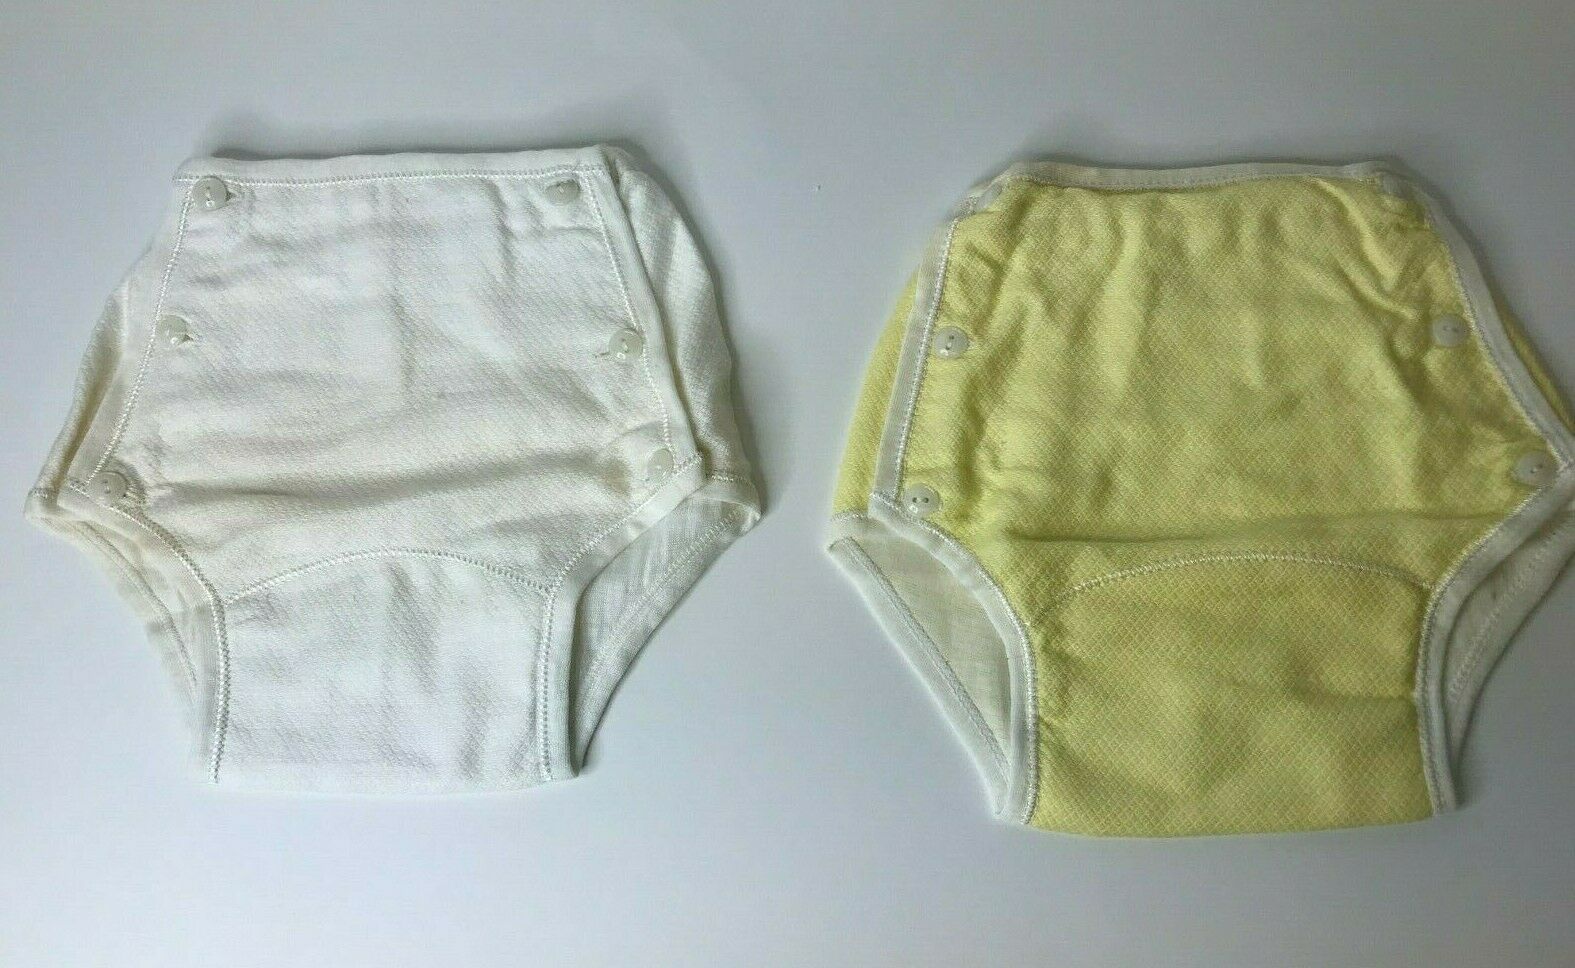 (2) Vintage Cloth Diaper Covers With Button Closure White/yellow Size 3